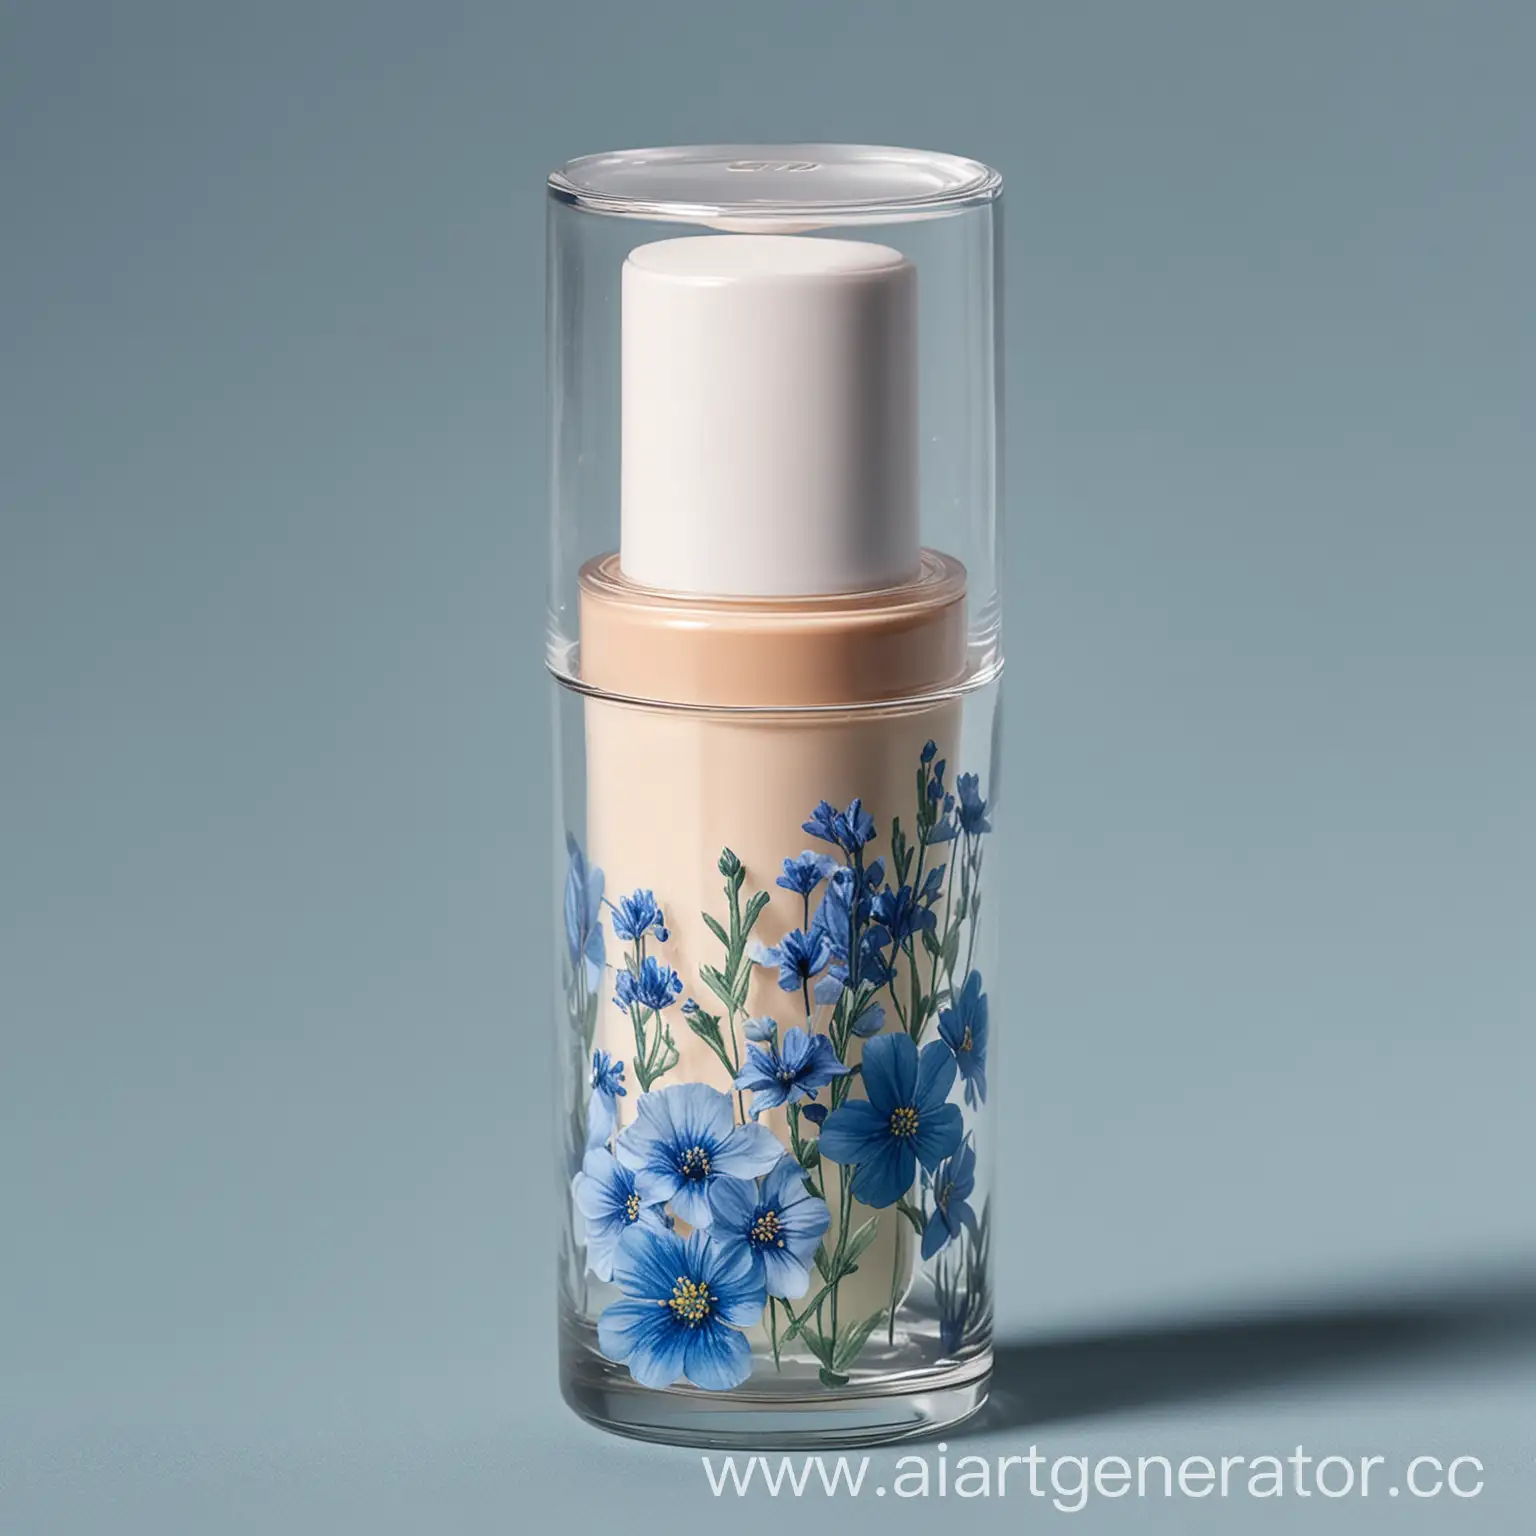 Light-Shade-Cosmetic-Concealer-in-Transparent-Glass-Package-with-Blue-Flowers